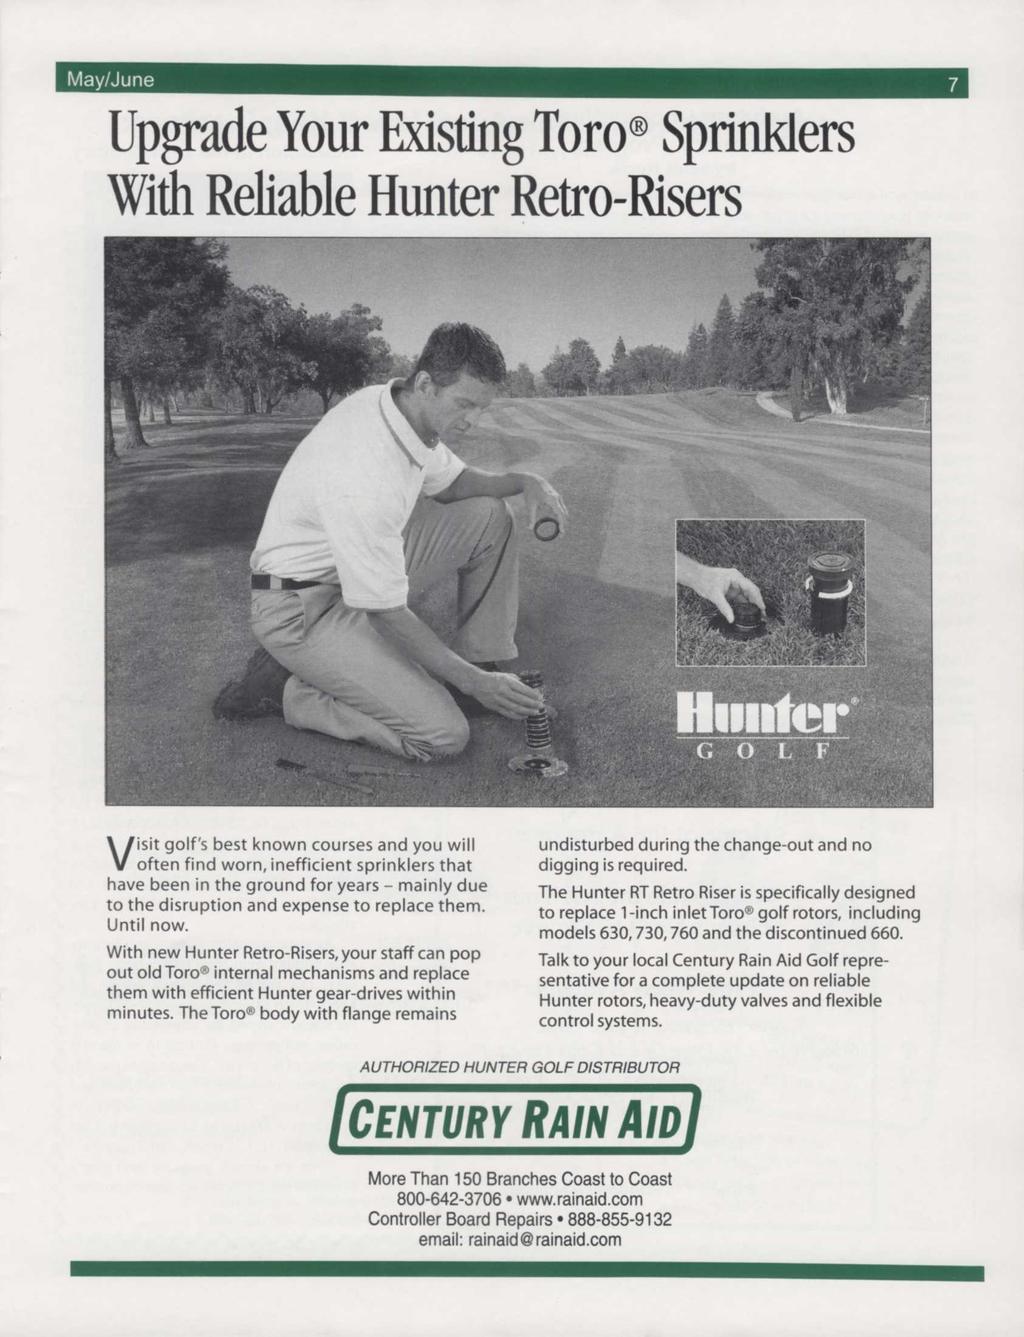 Upgrade Your Existing Toro Sprinklers With Reliable Hunter Retro-Risers Visit golf's best known courses and you will often find worn, inefficient sprinklers that have been in the ground for years -